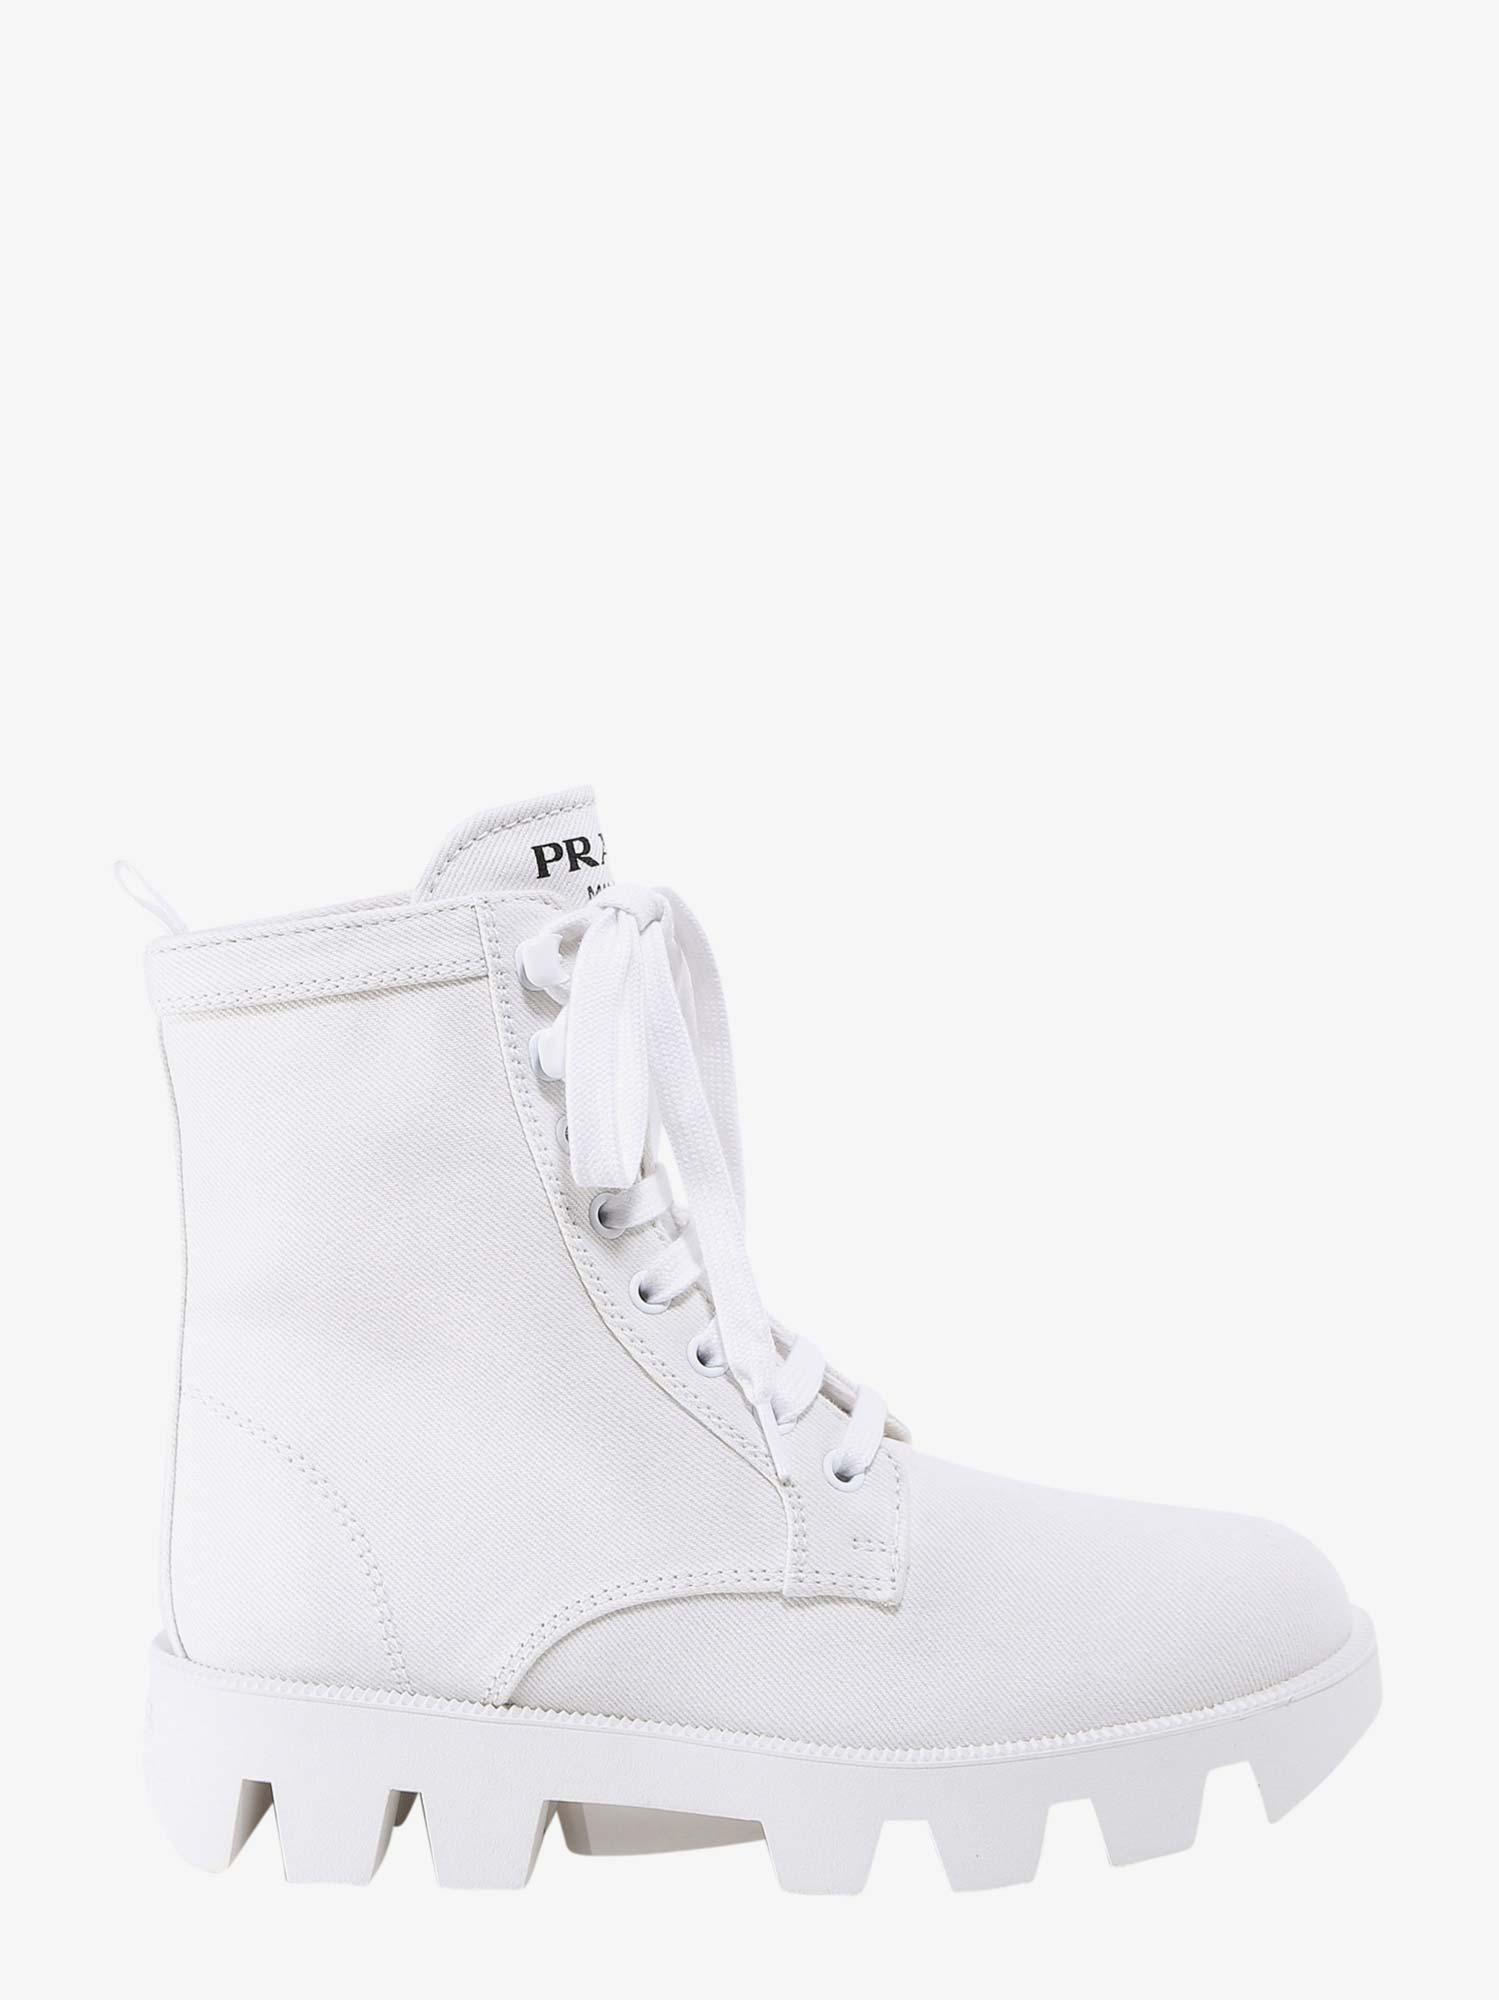 Prada Canvas Ankle Boots in White - Lyst